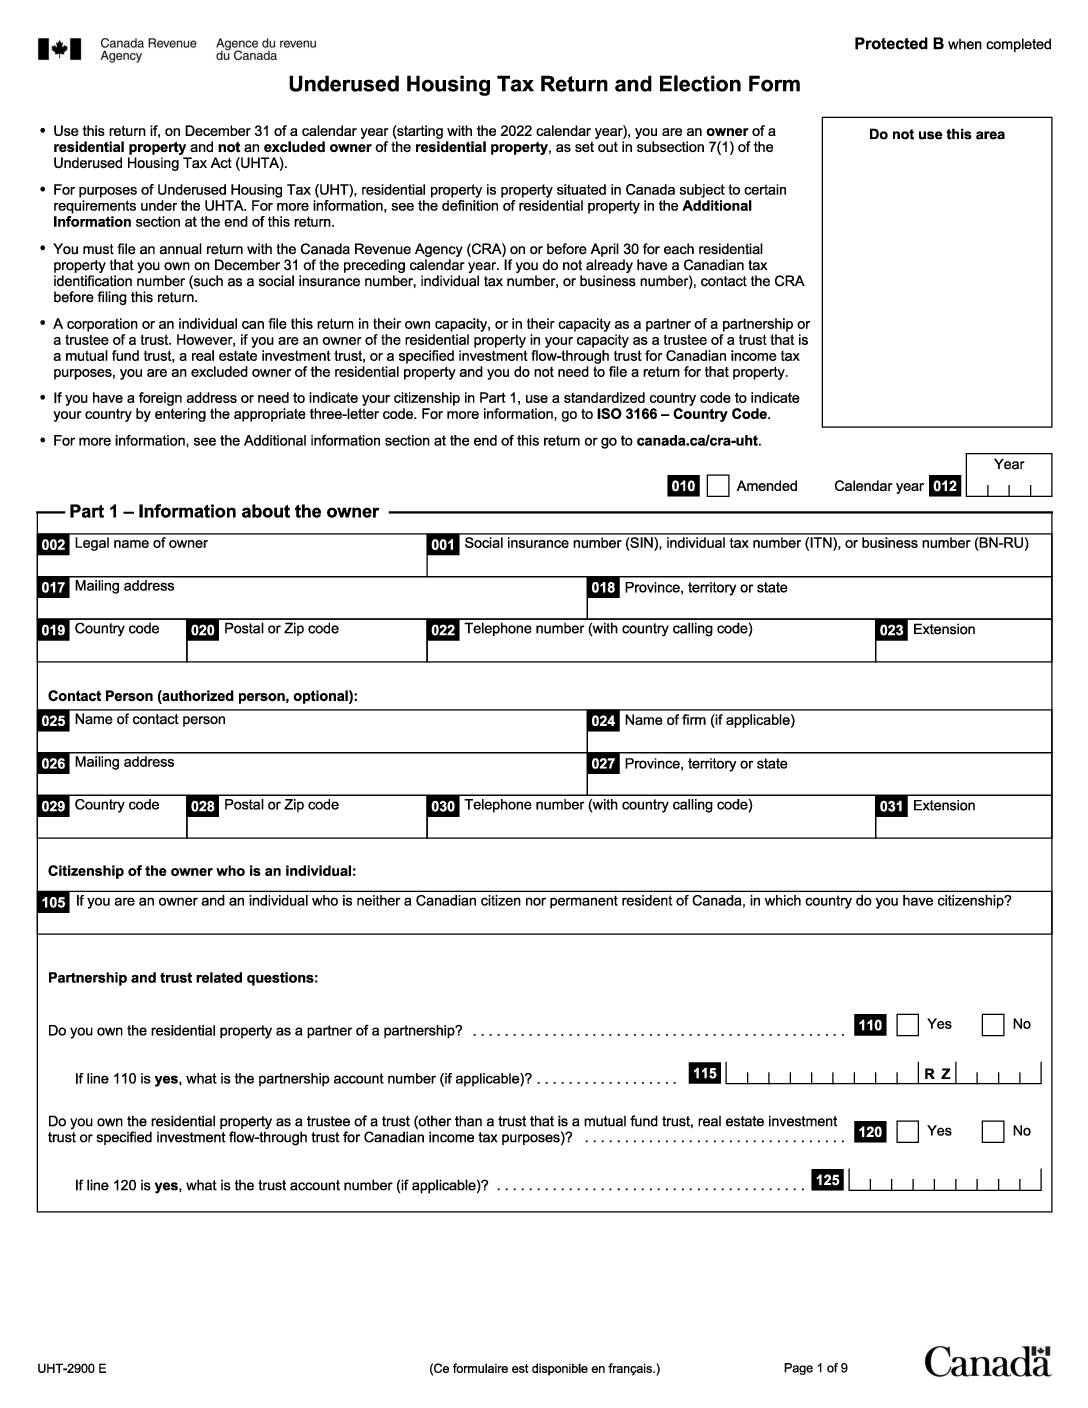 Underused Housing Tax Return and Election Form